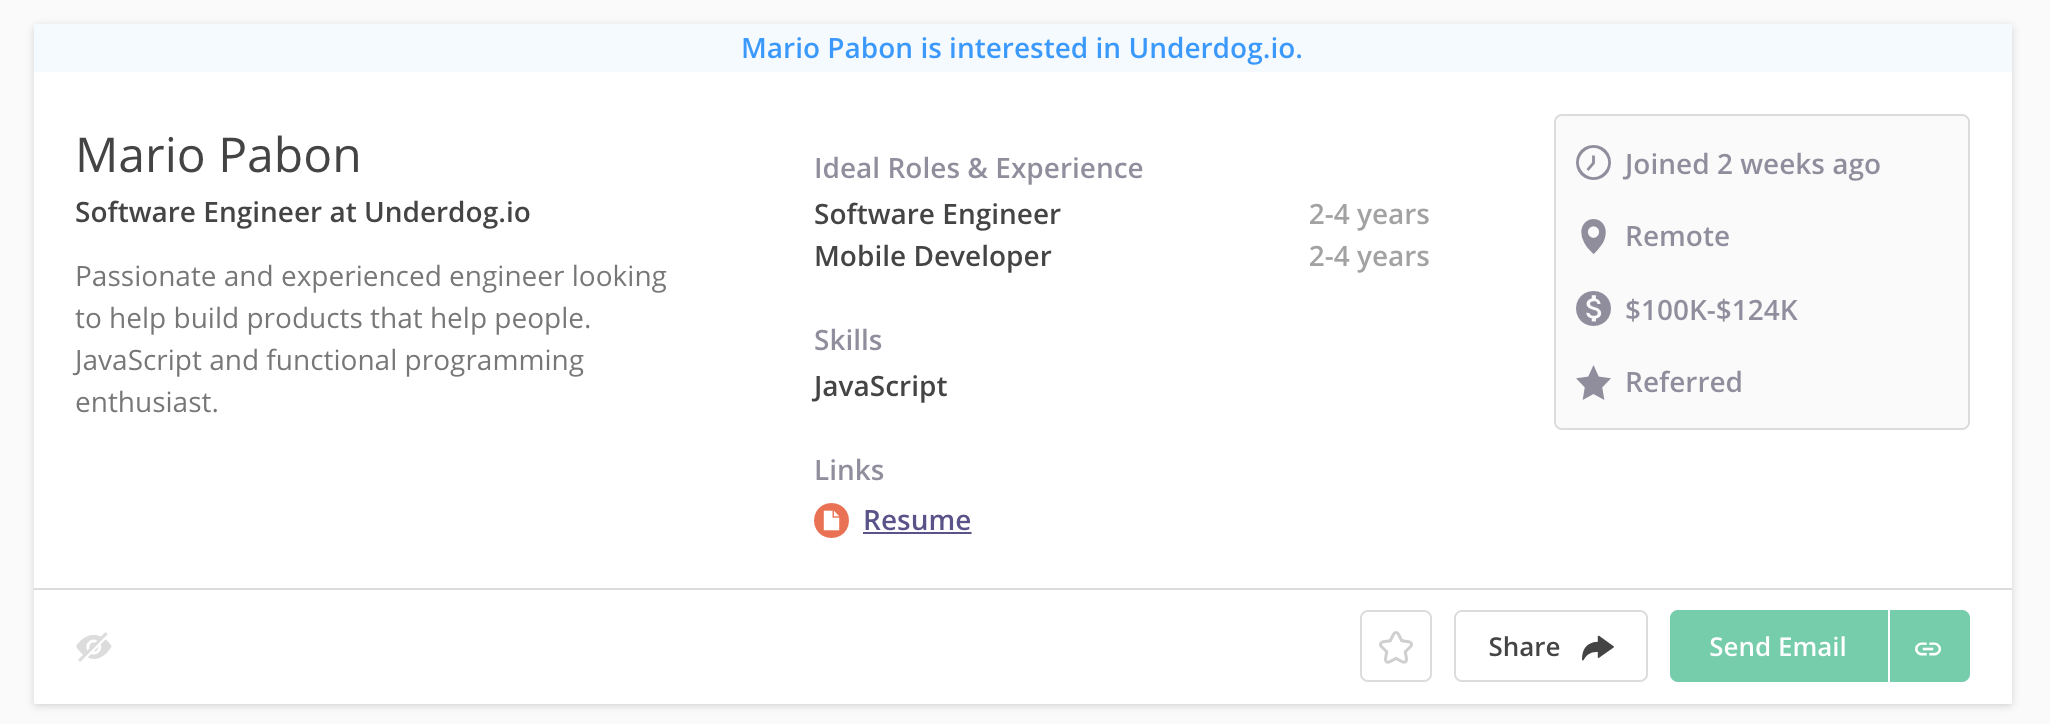 candidate_expressed_interest_screenshot.png